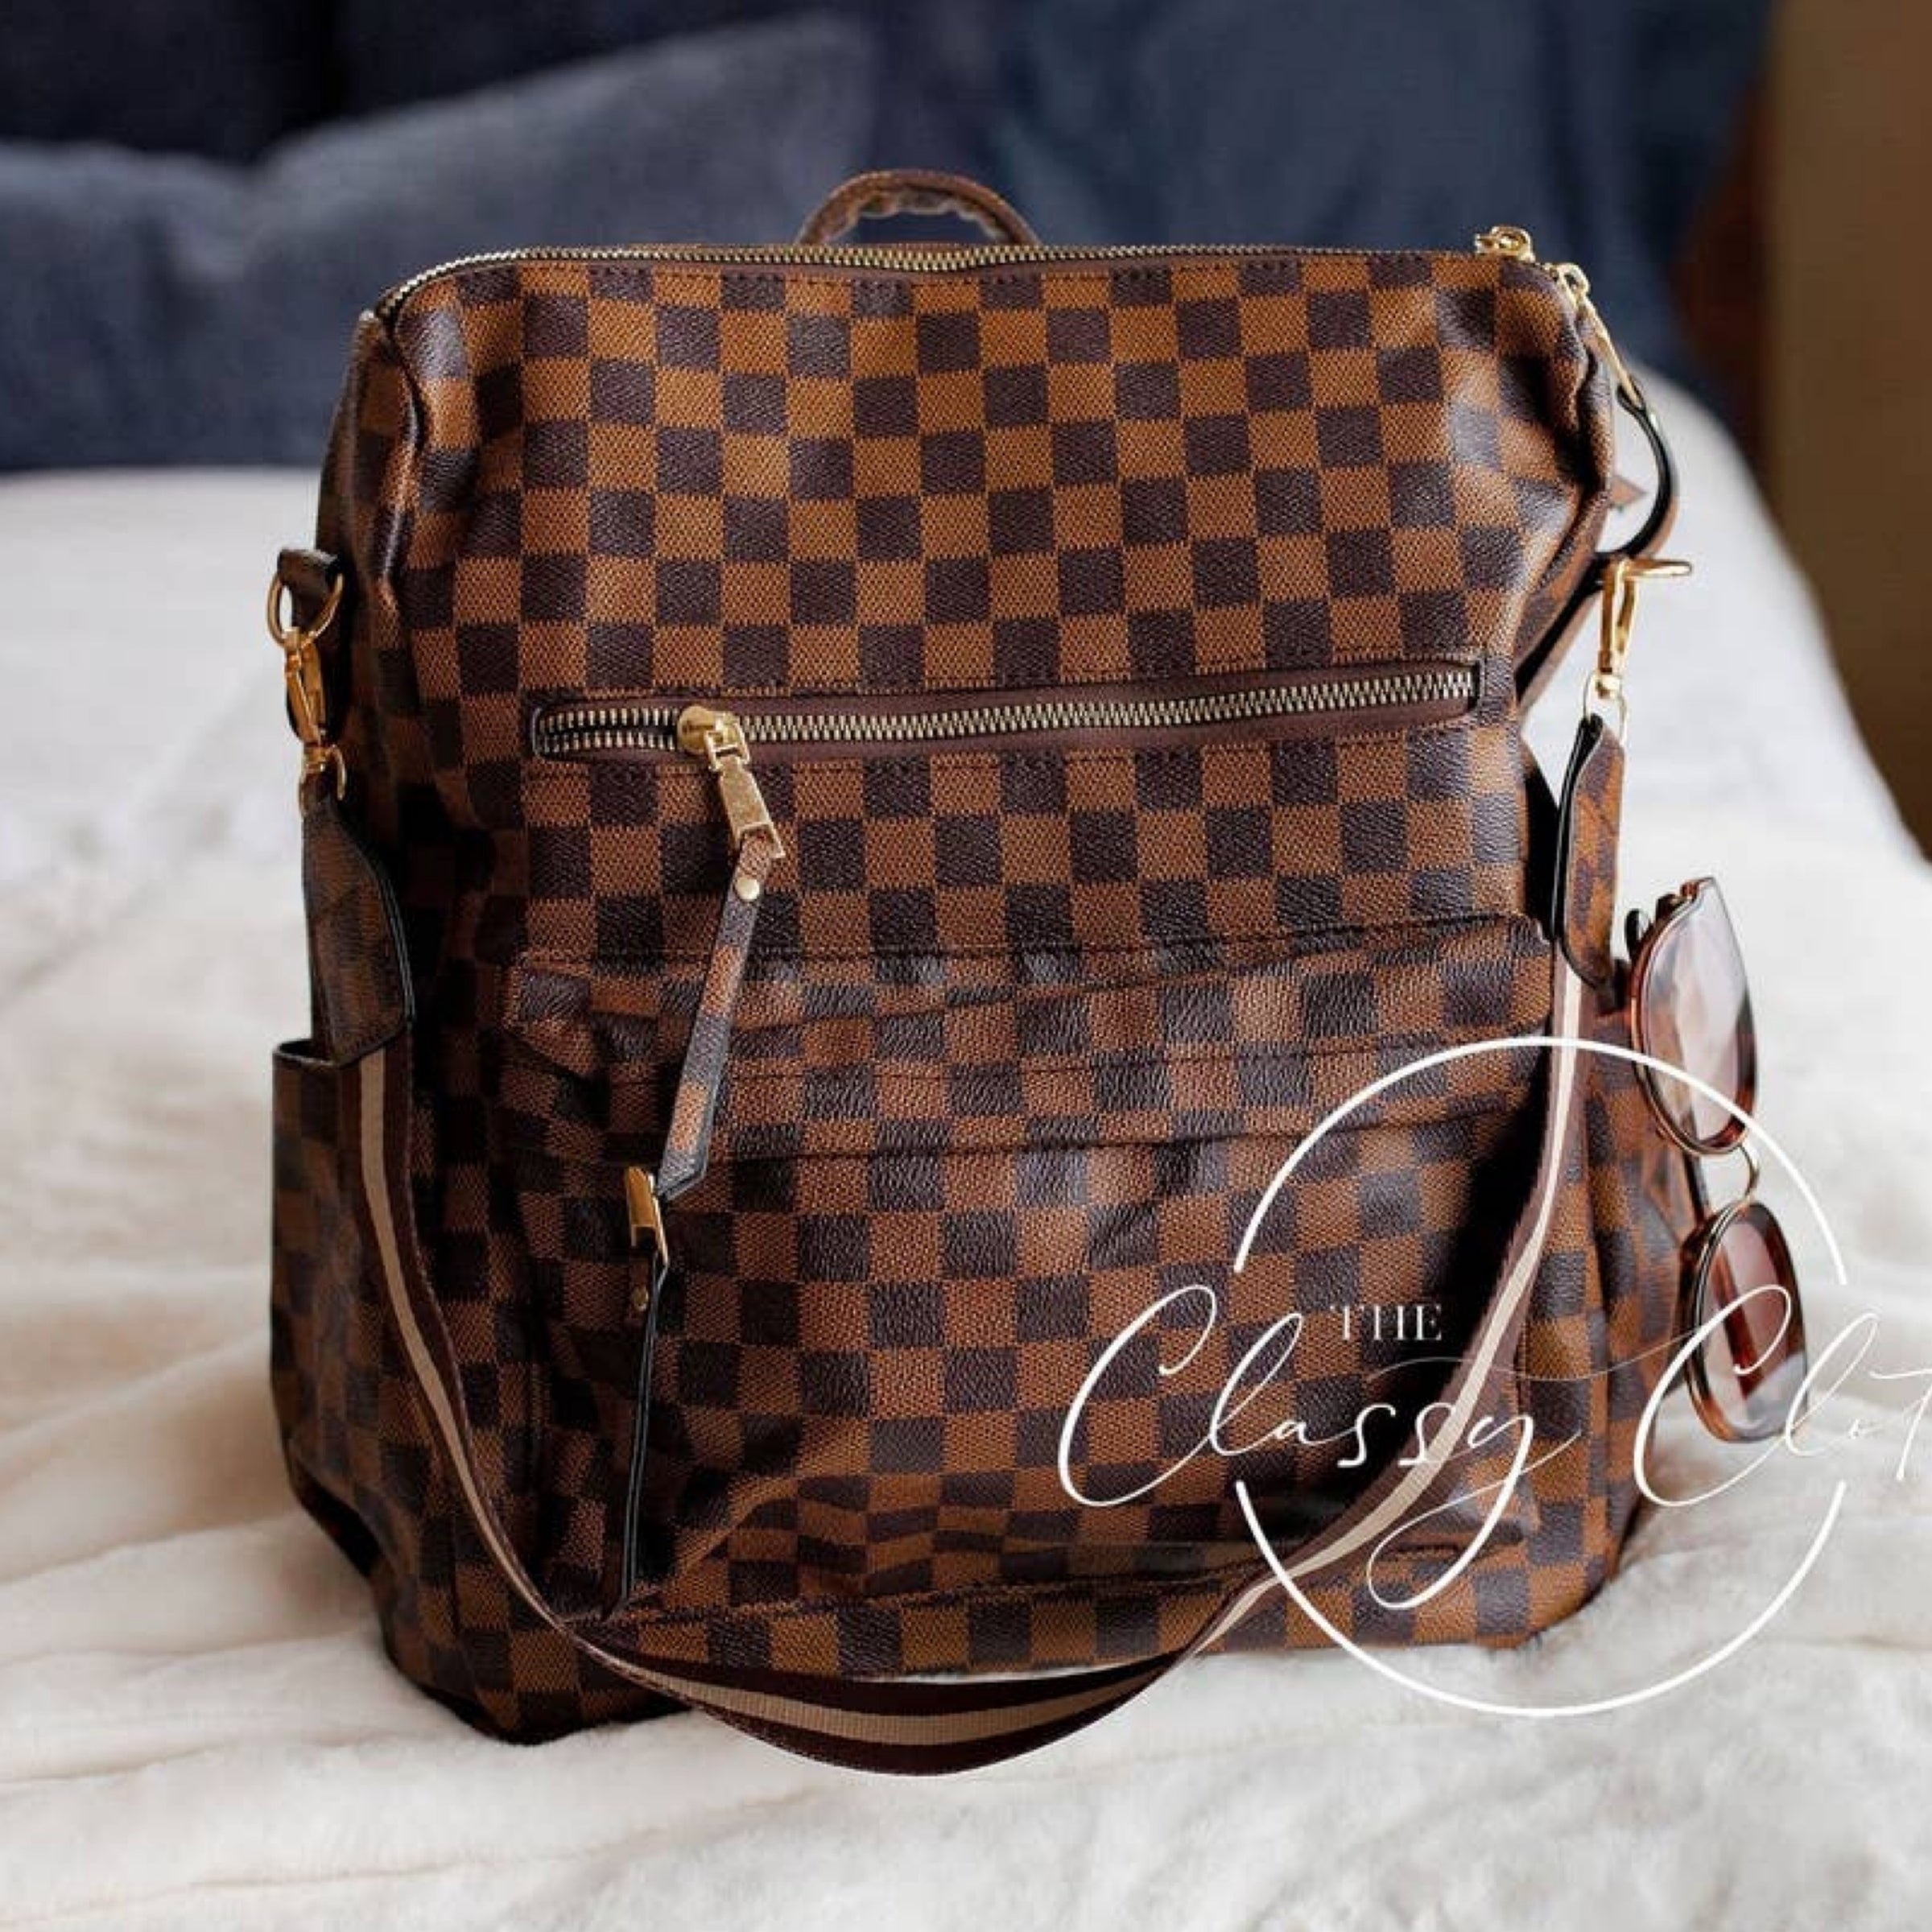 vuitton backpack checkered